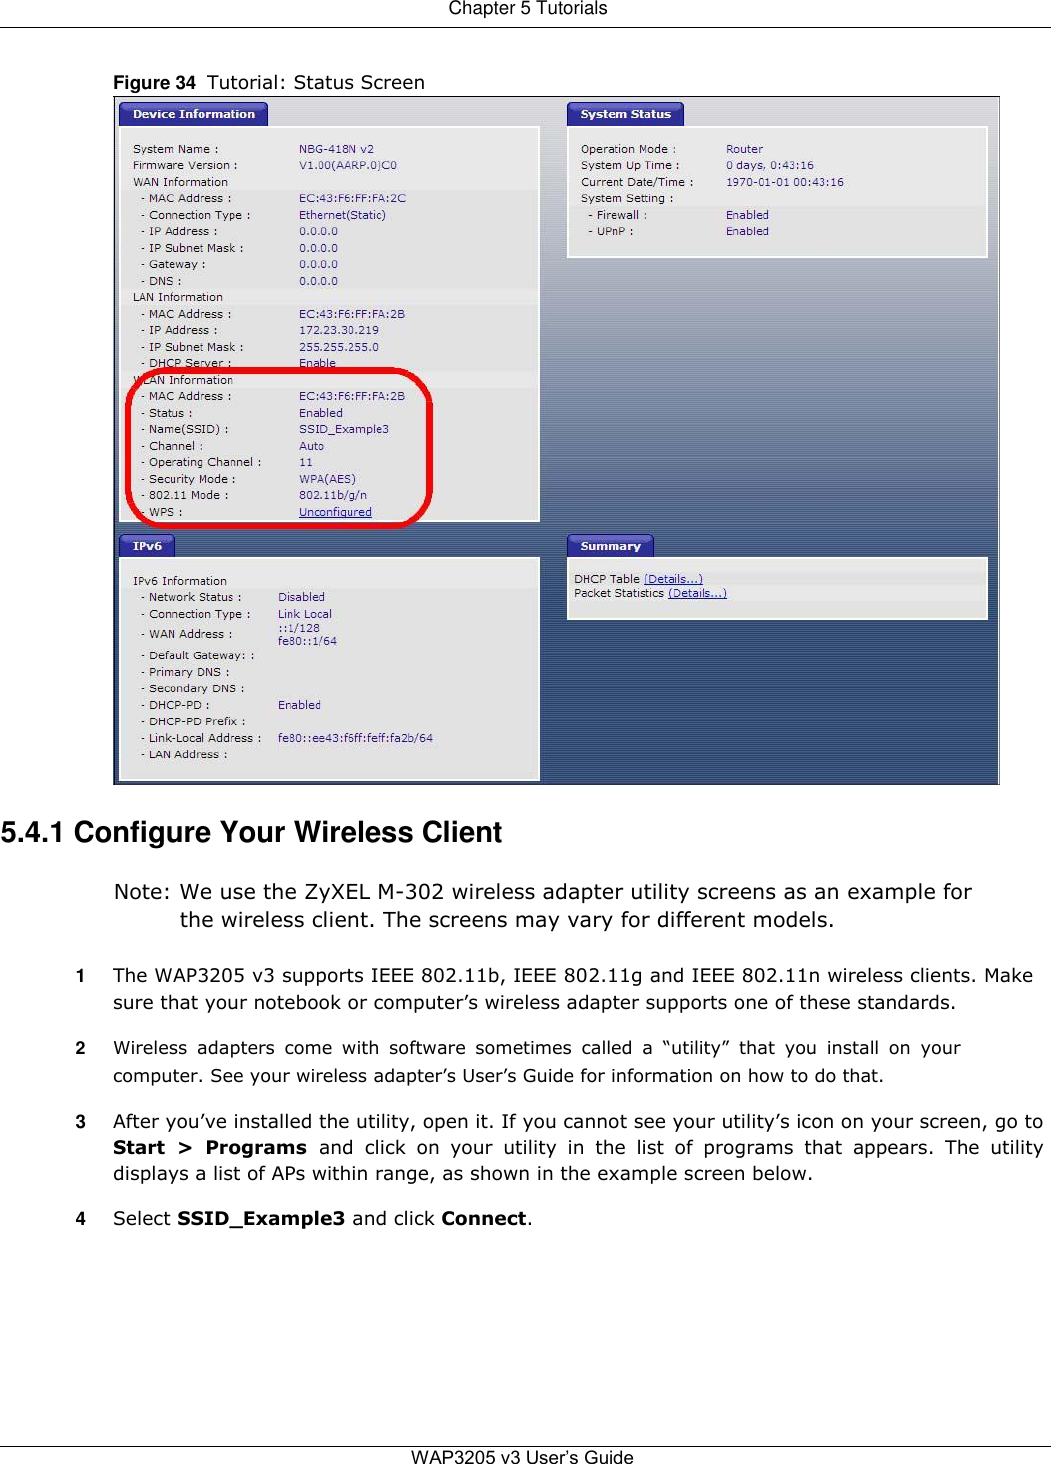 Chapter 5 Tutorials   Figure 34  Tutorial: Status Screen                                   5.4.1 Configure Your Wireless Client  Note: We use the ZyXEL M-302 wireless adapter utility screens as an example for the wireless client. The screens may vary for different models.  1  The WAP3205 v3 supports IEEE 802.11b, IEEE 802.11g and IEEE 802.11n wireless clients. Make sure that your notebook or computer’s wireless adapter supports one of these standards.  2  Wireless  adapters  come  with  software  sometimes  called  a  “utility”  that  you  install  on  your computer. See your wireless adapter’s User’s Guide for information on how to do that.  3  After you’ve installed the utility, open it. If you cannot see your utility’s icon on your screen, go to Start  &gt;  Programs  and  click  on  your  utility  in  the  list  of  programs  that  appears.  The  utility displays a list of APs within range, as shown in the example screen below.  4  Select SSID_Example3 and click Connect.           WAP3205 v3 User’s Guide  